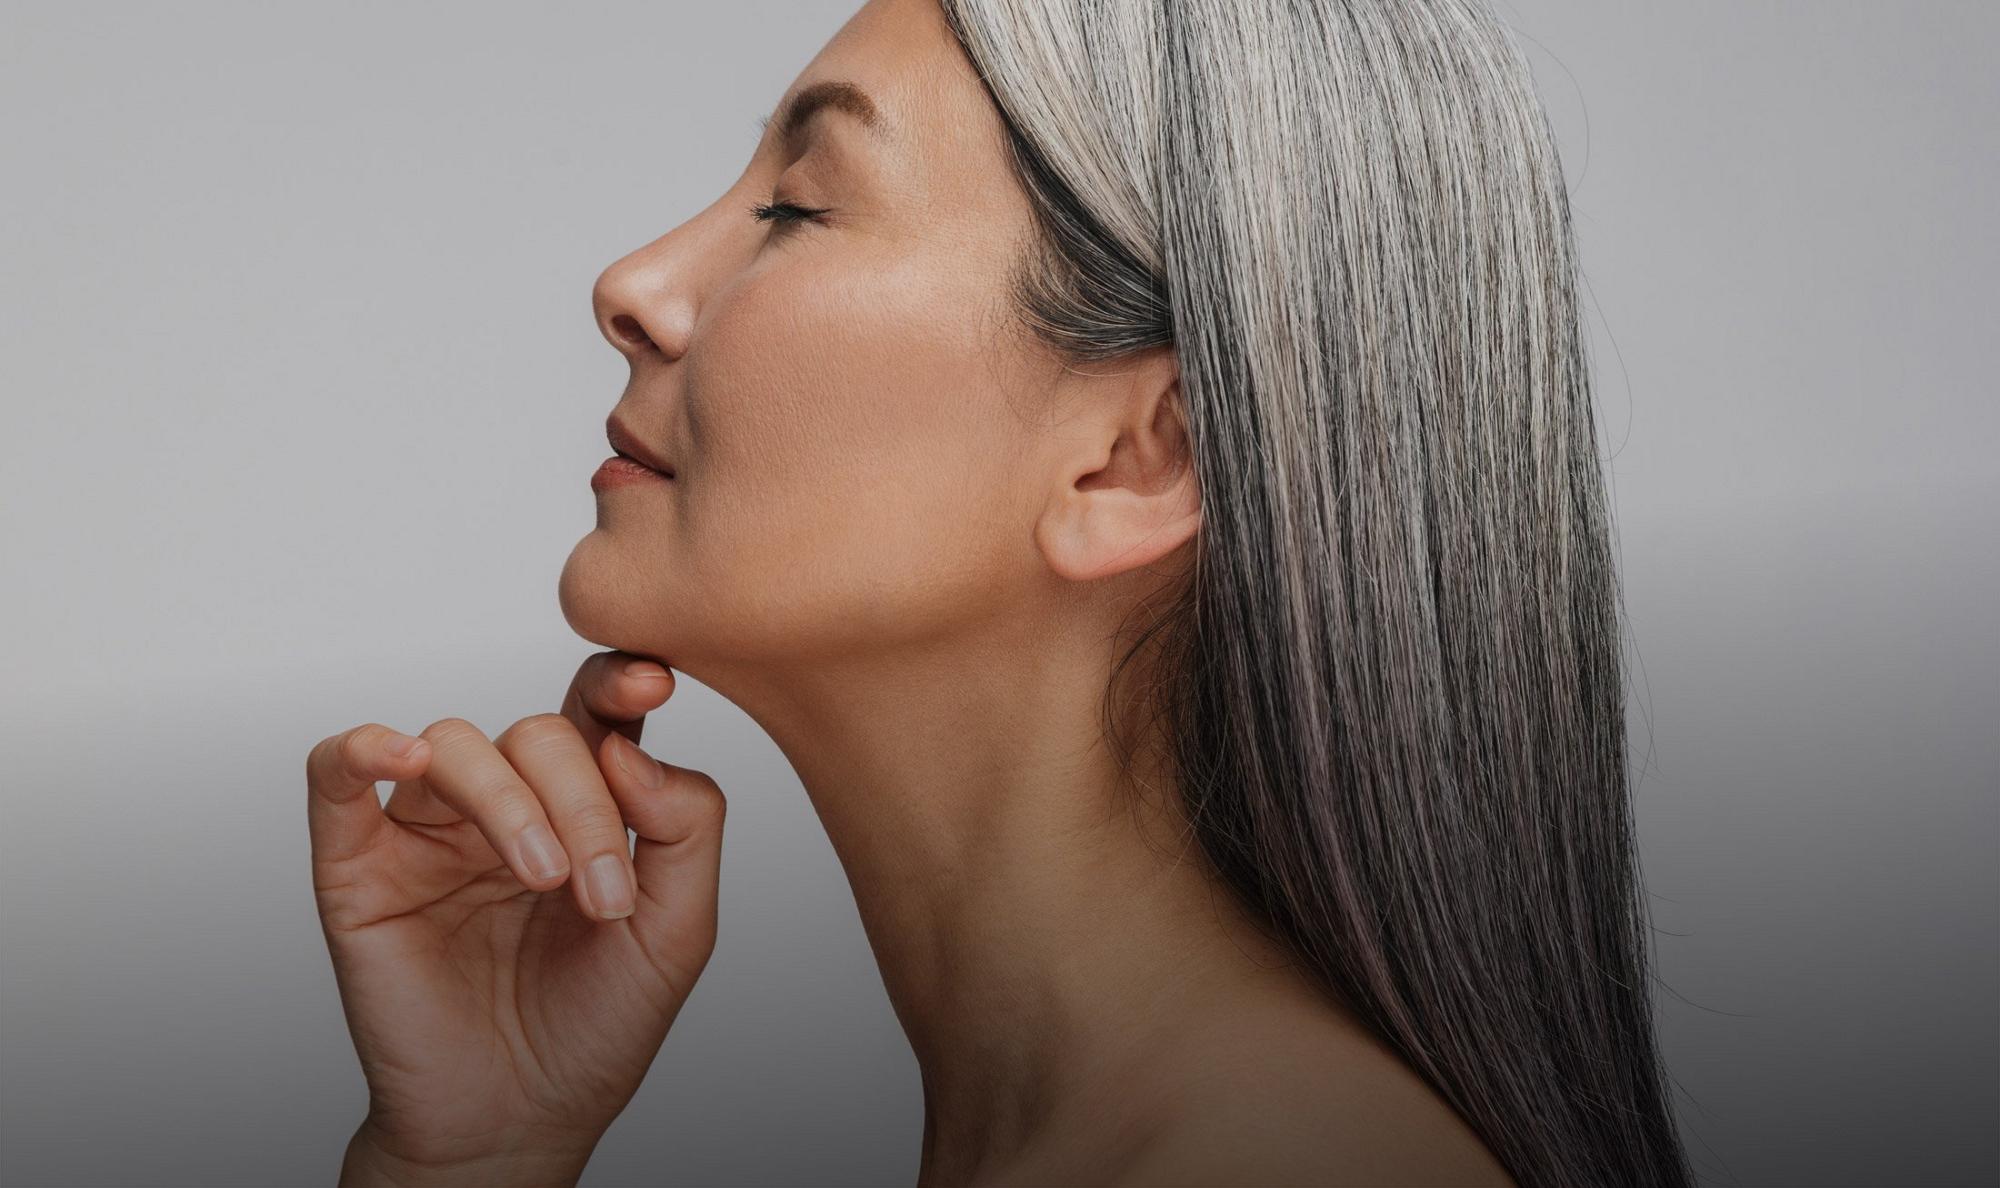 deep plane facelift patient model lifting her chin up with a finger